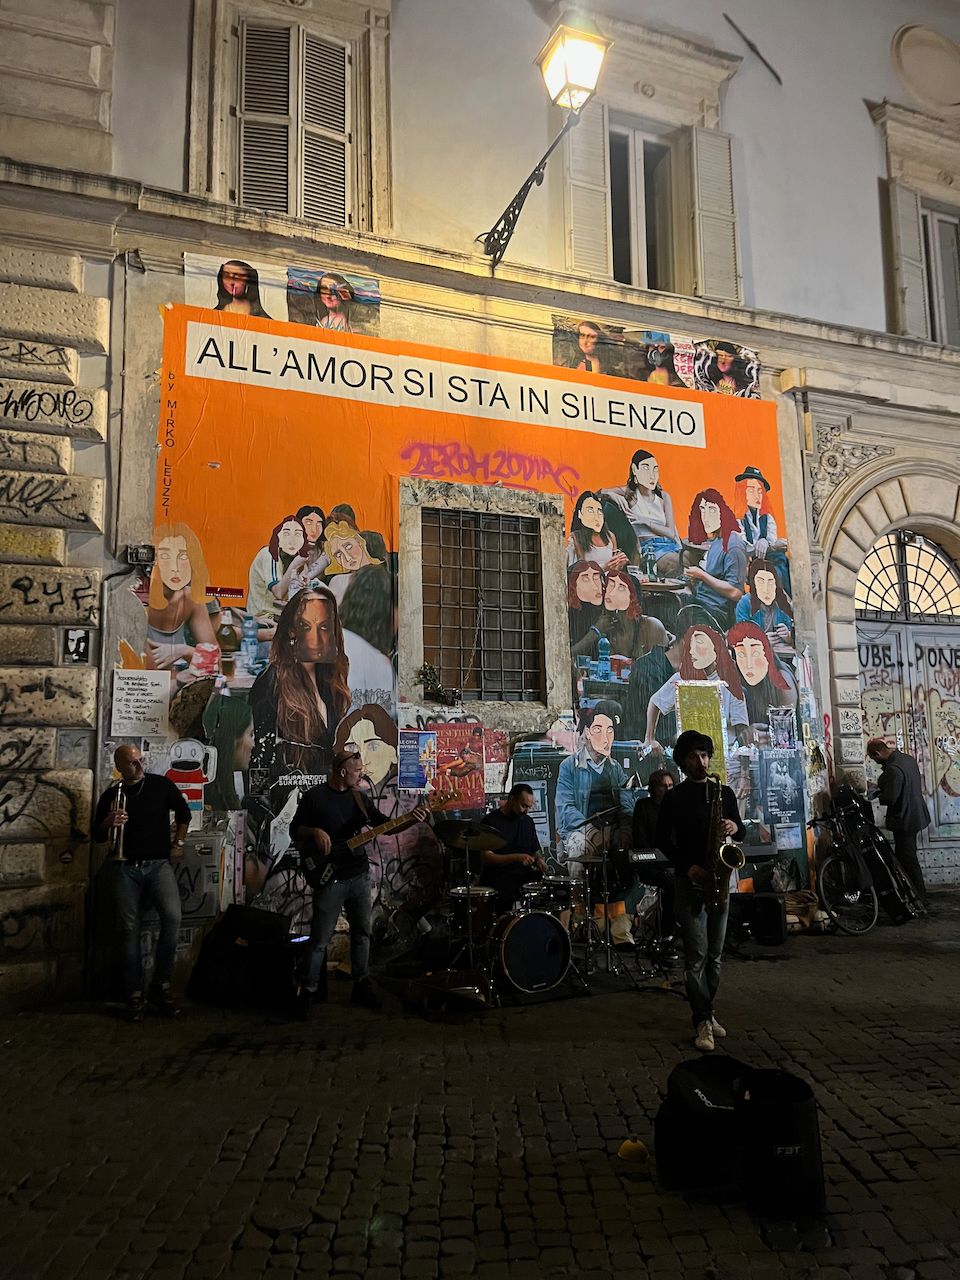 A jazz band at night on a cobblestone road, against a wall with a large orange mural with drawn faces and the text "ALL'AMOR SI STA IN SILENZIO", below a street light. There's tenor sax, trumpet, bass, drums, and keyboard.